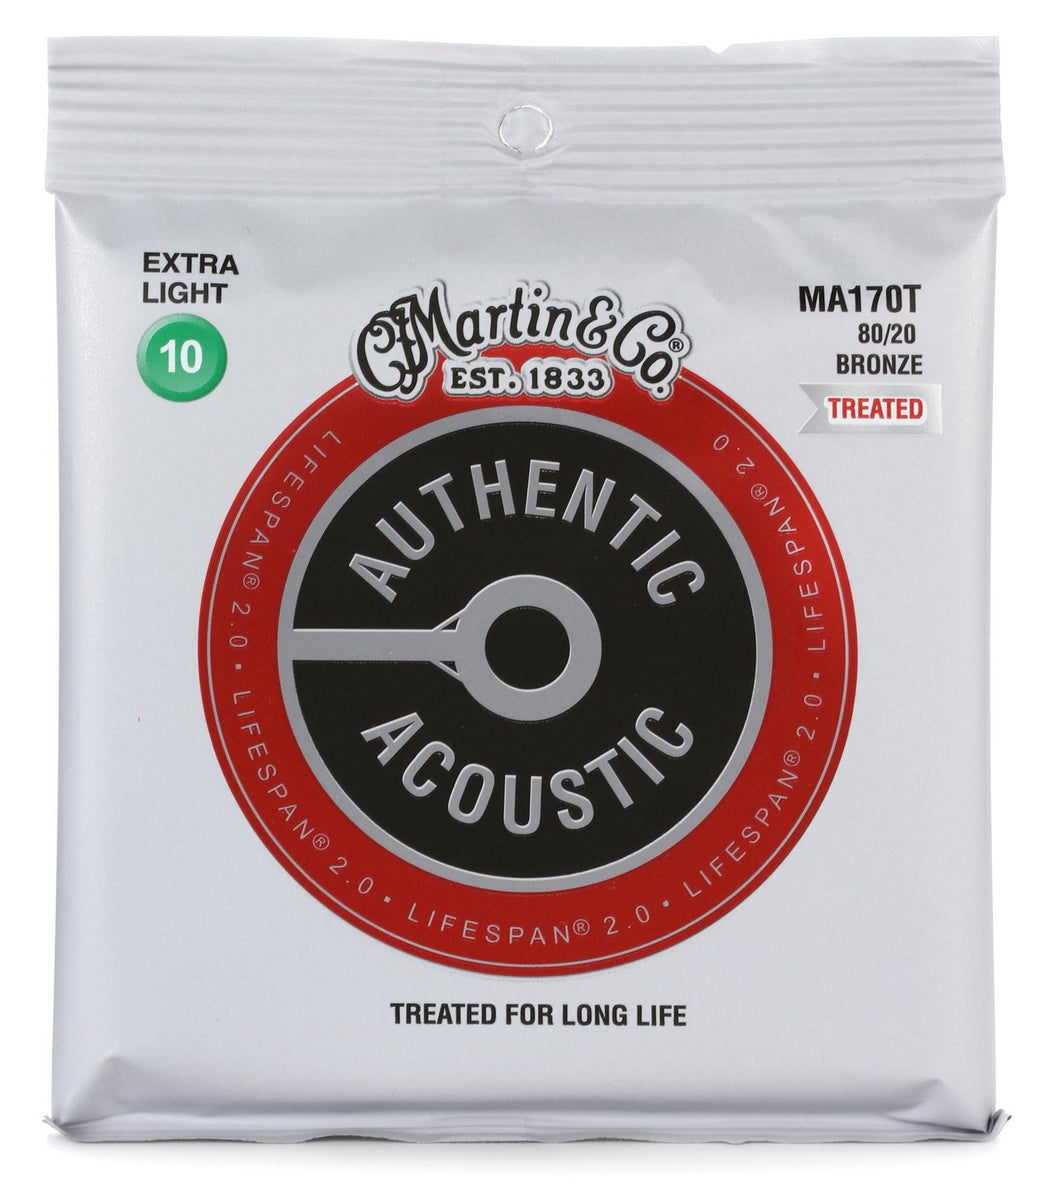 Martin MA170T Authentic Lifespan 2.0 Treated 80/20 Bronze Acoustic Guitar Strings - Extra Light